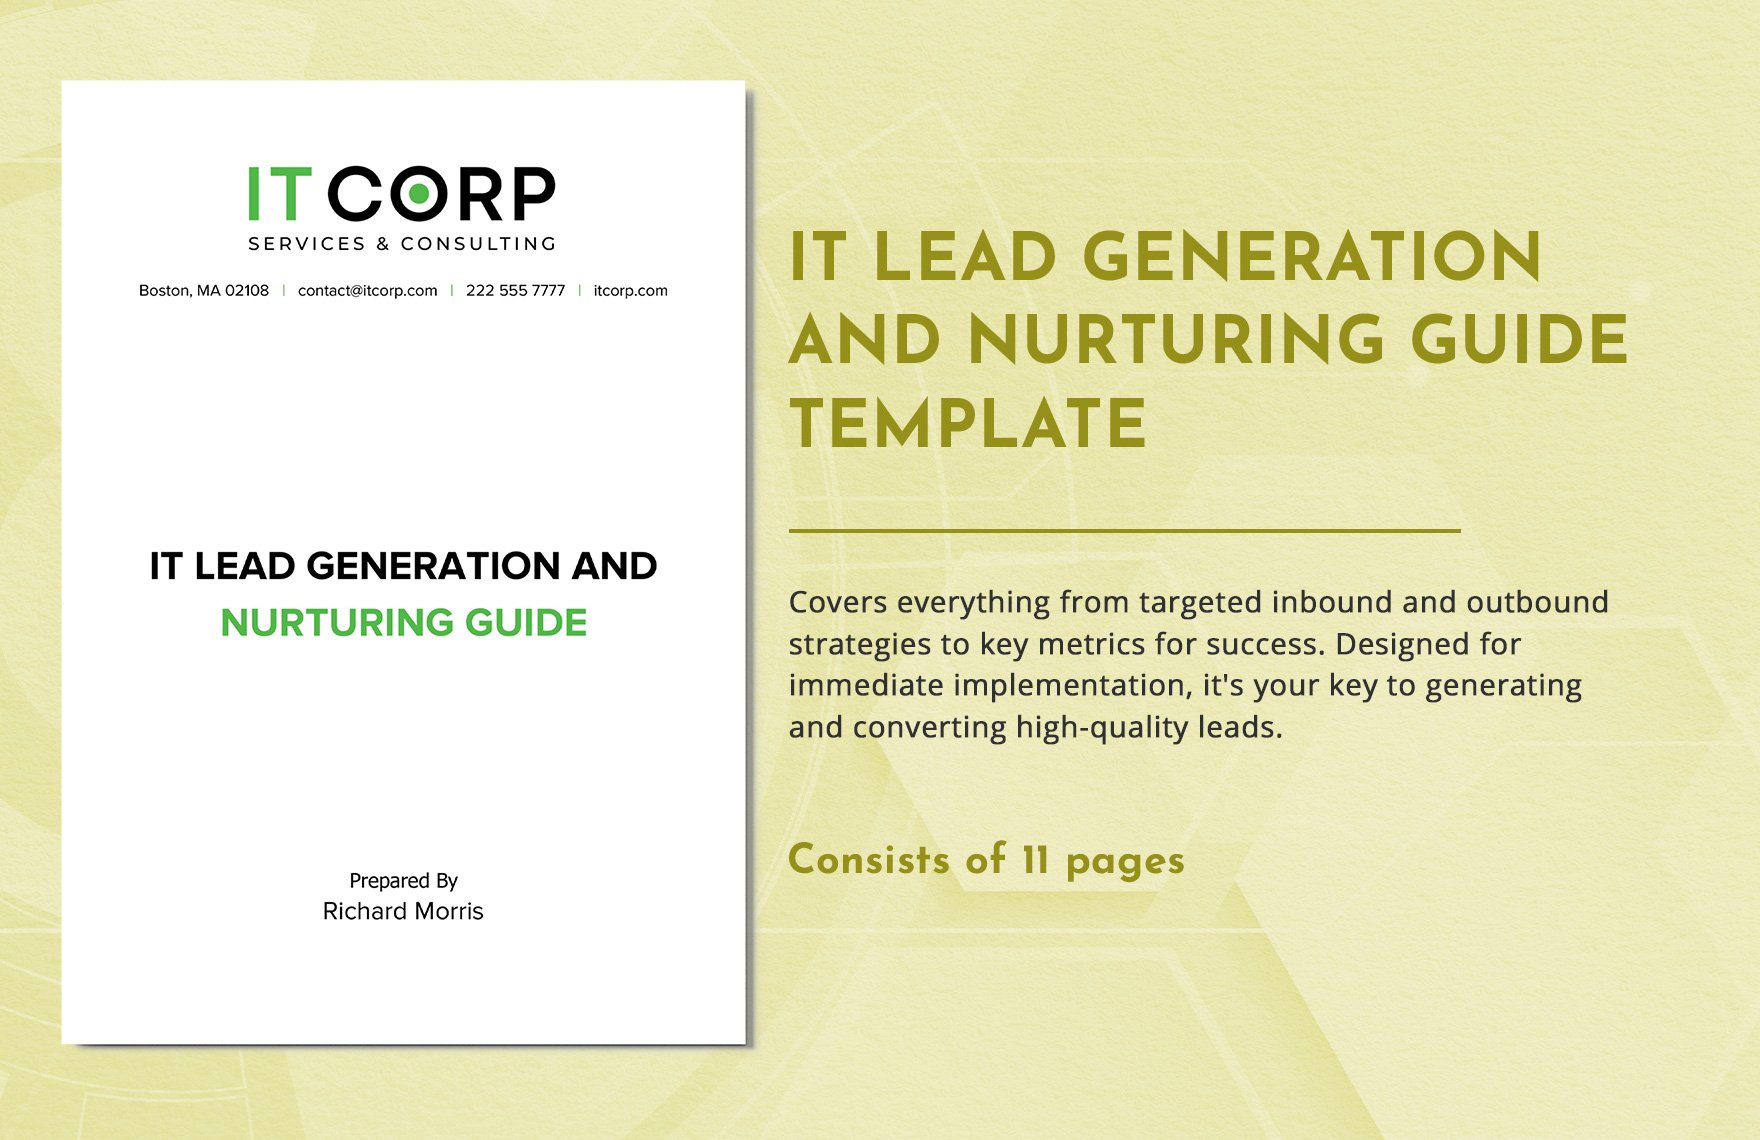 IT Lead Generation and Nurturing Guide Template